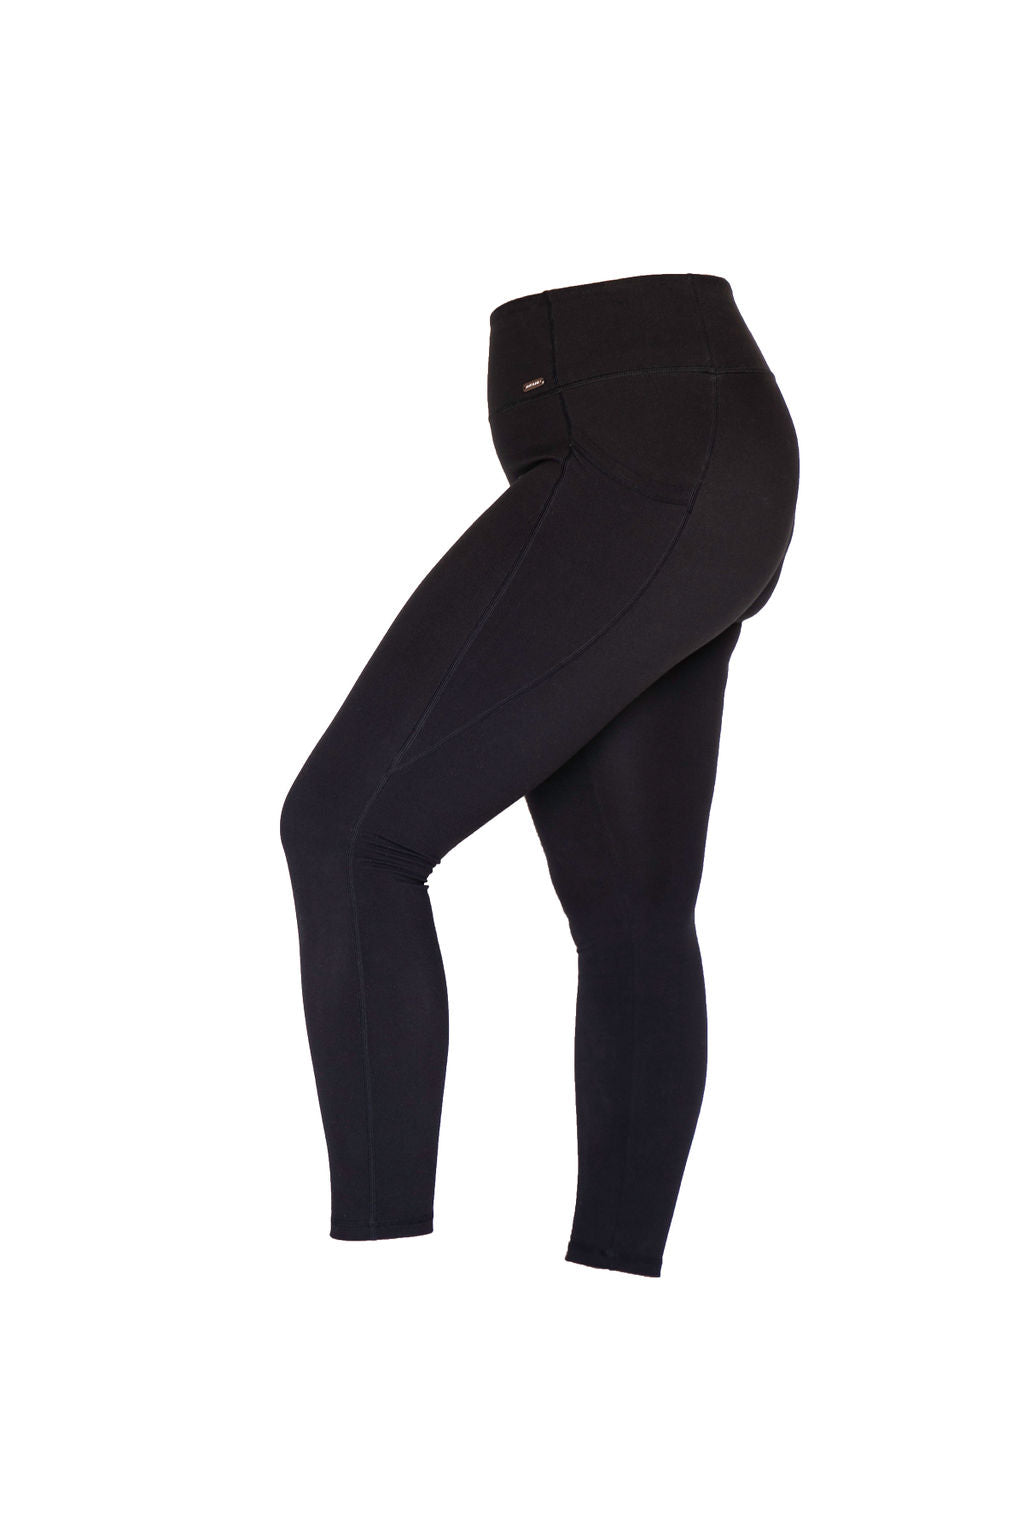 Why our Core High Waisted Black Leggings are the ideal pair of leggings for any activity